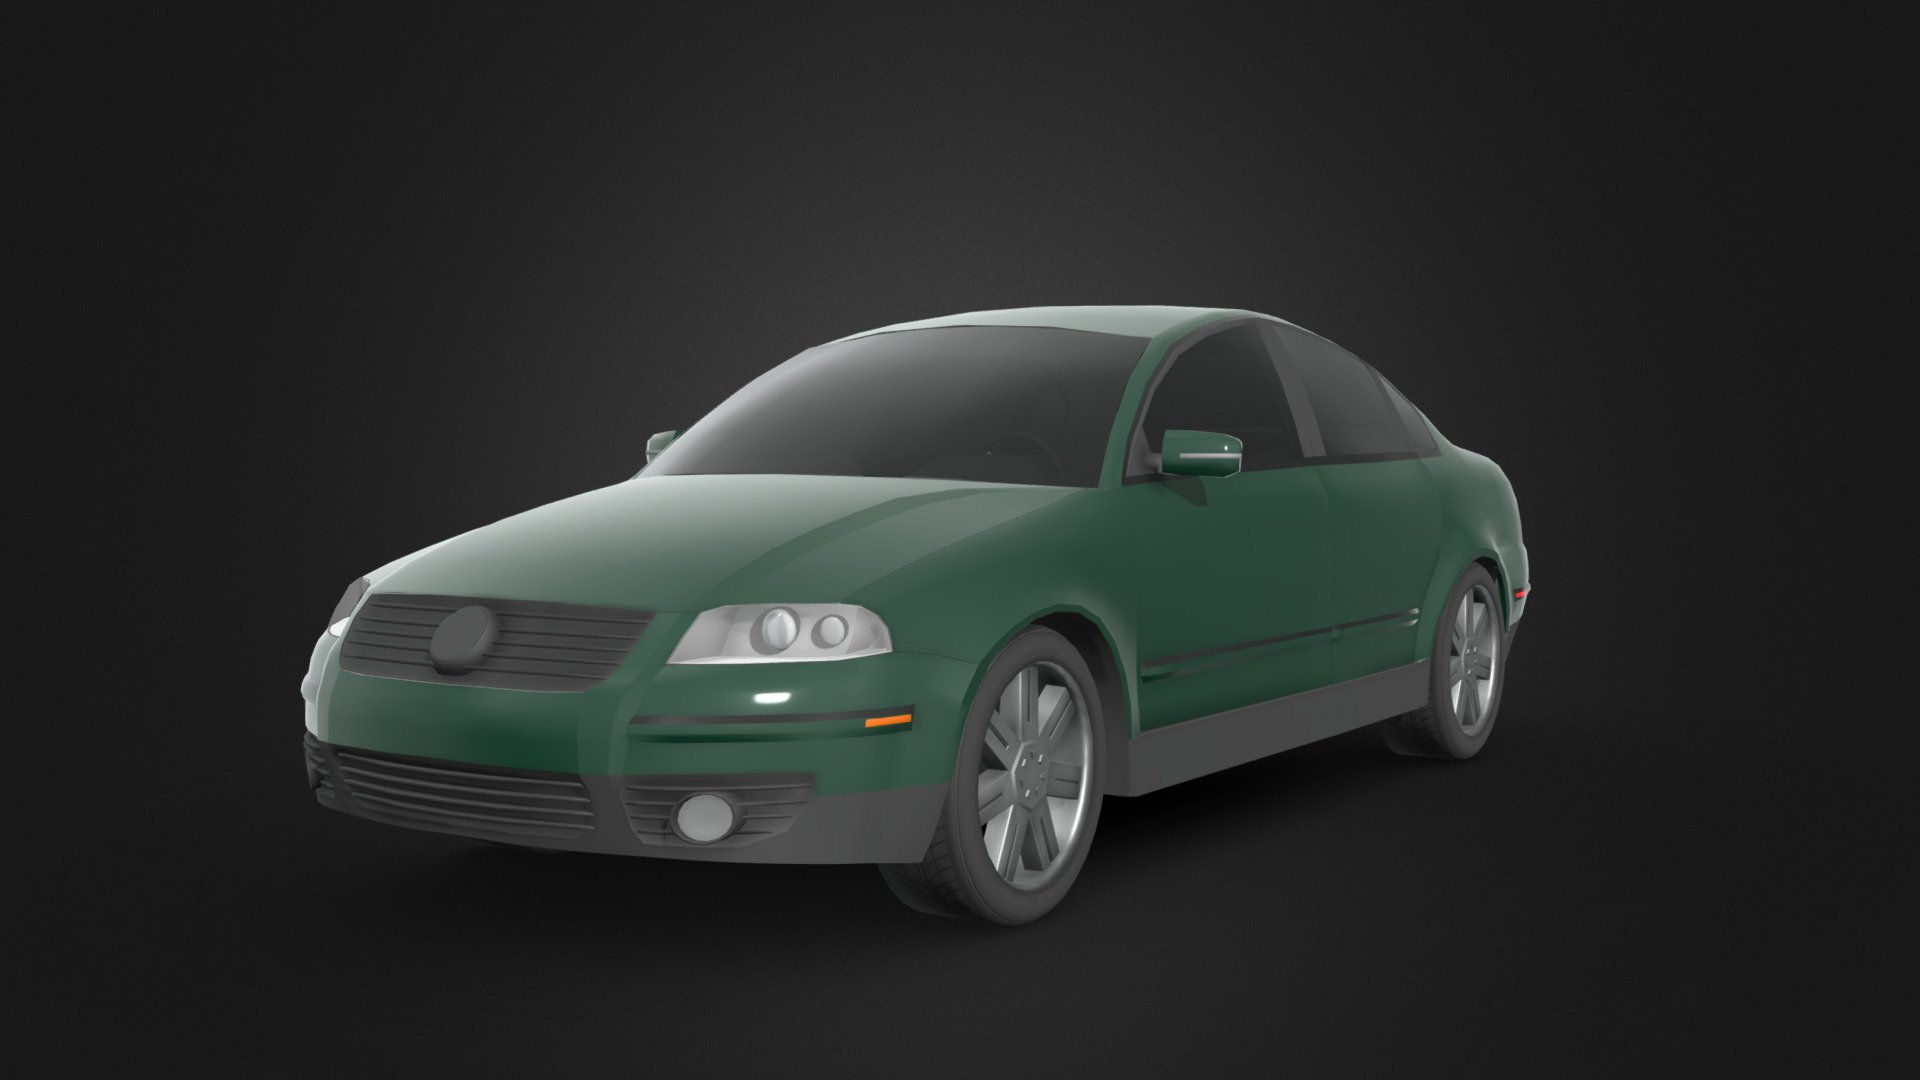 Volkswagen Passat 2004 V6 4Motion with American side markers. One of my first car models - Volkswagen Passat - Download Free 3D model by I3D (@I3D99) 3d model